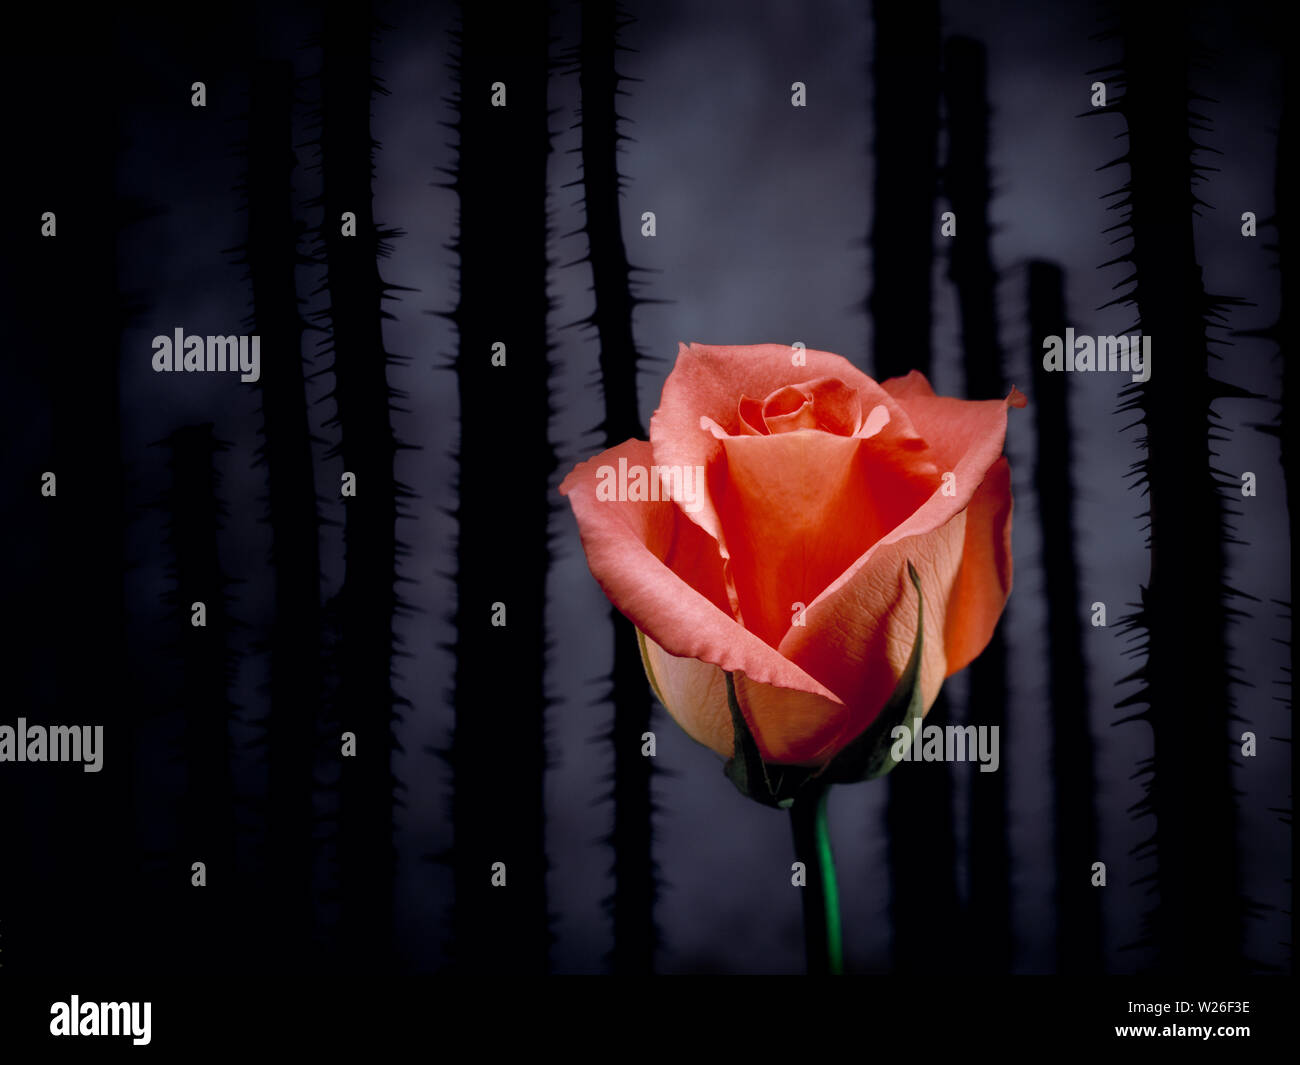 A pink rose in a field of thorns, from a series of light painted florals in studio/ Stock Photo